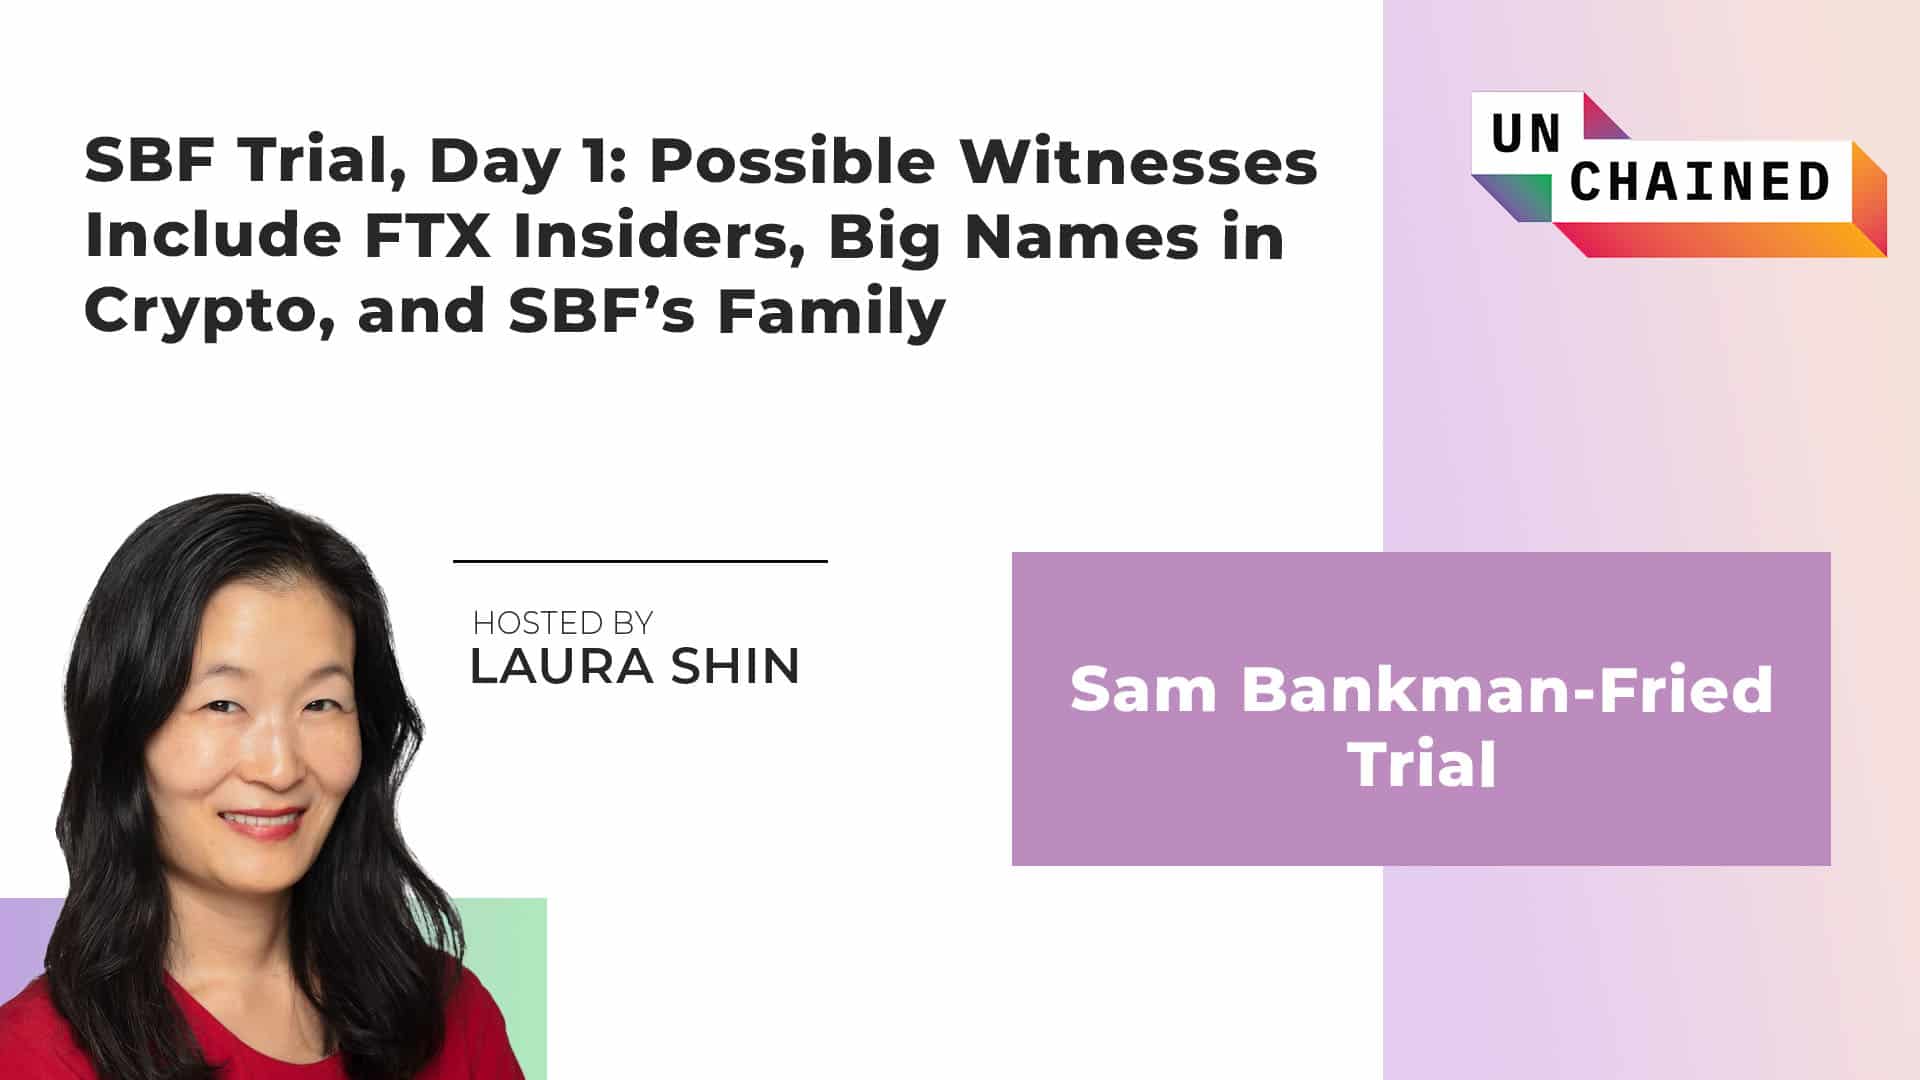 SBF Trial, Day 1: Possible Witnesses Include FTX Insiders, Big Names in Crypto, and SBF’s Family